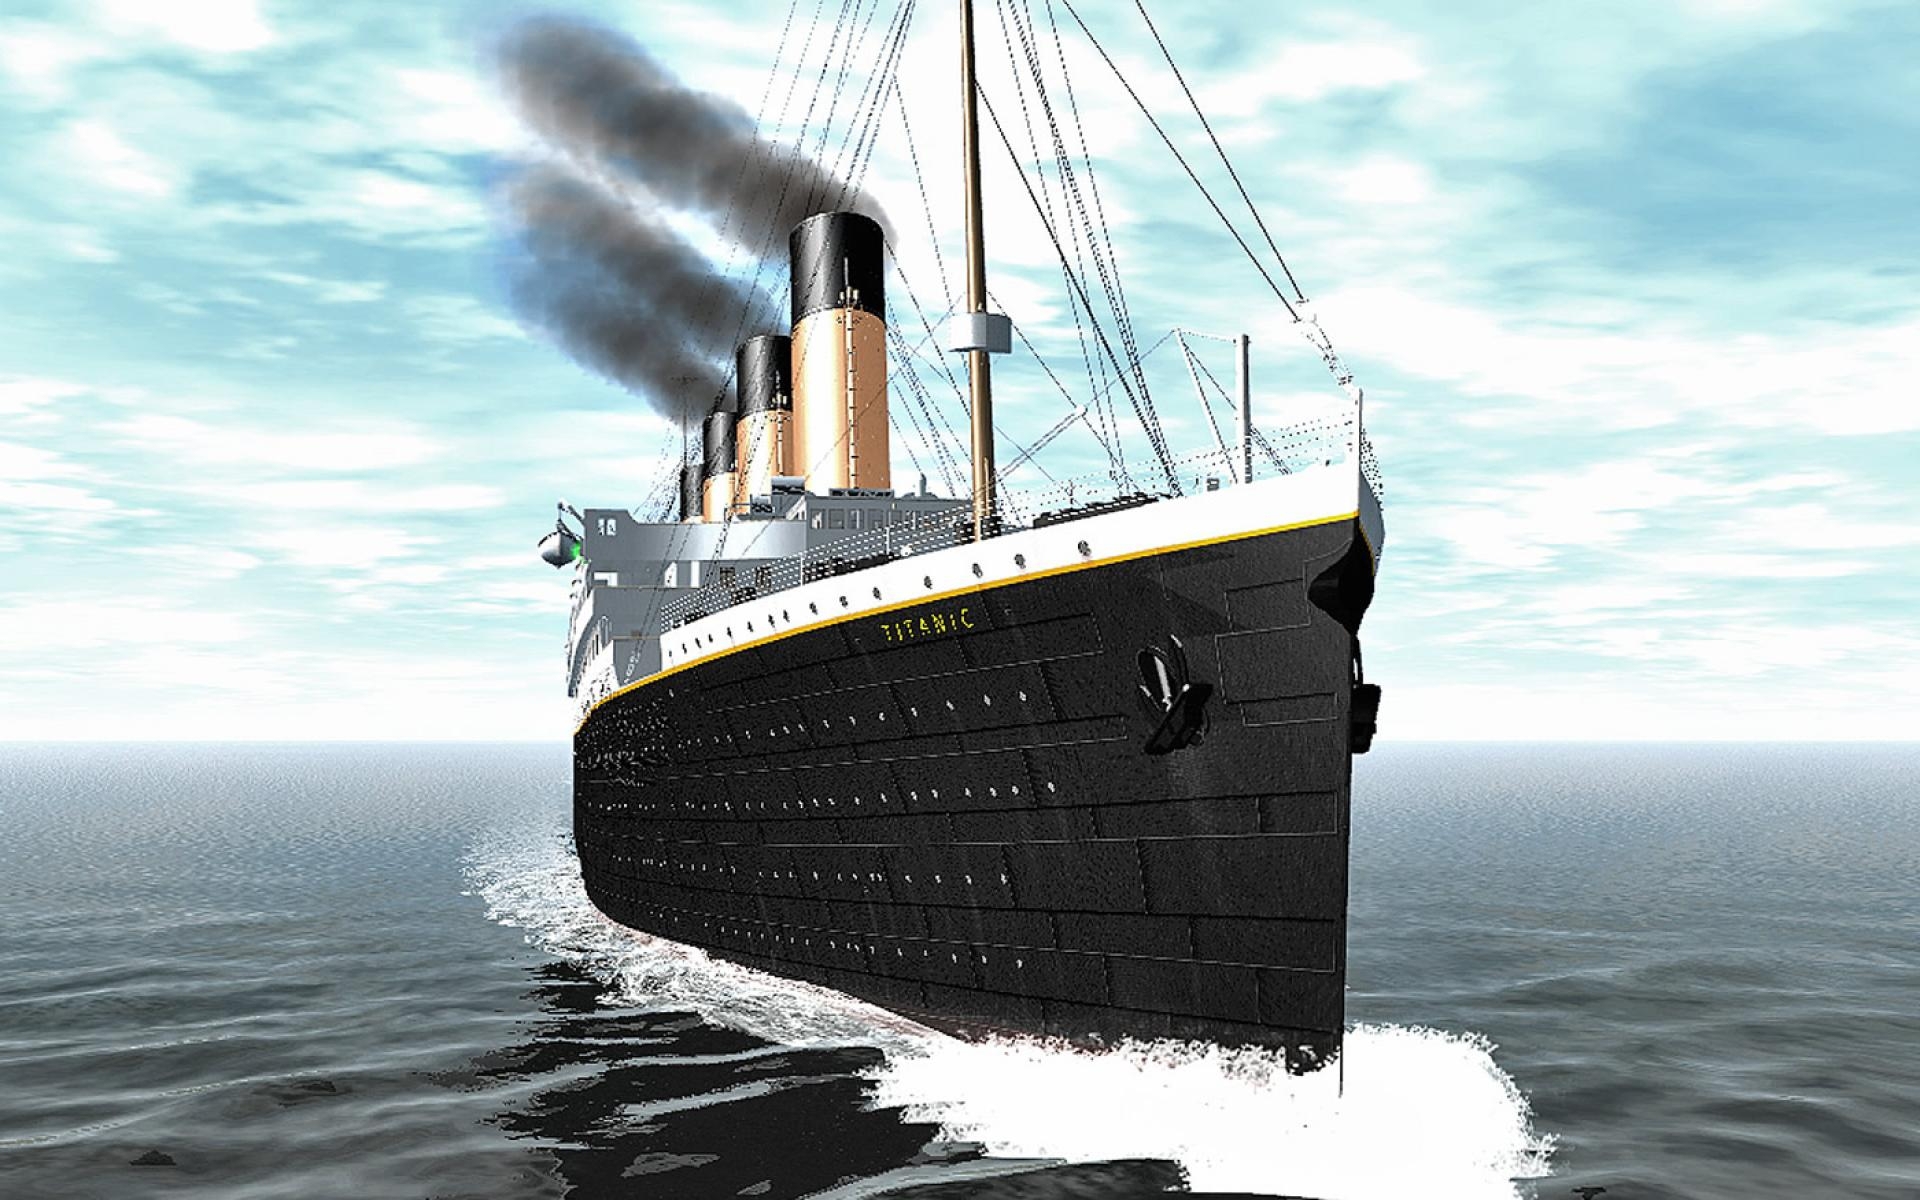 Titanic - photo wallpapers and pictures of the Titanic | Titanic ...